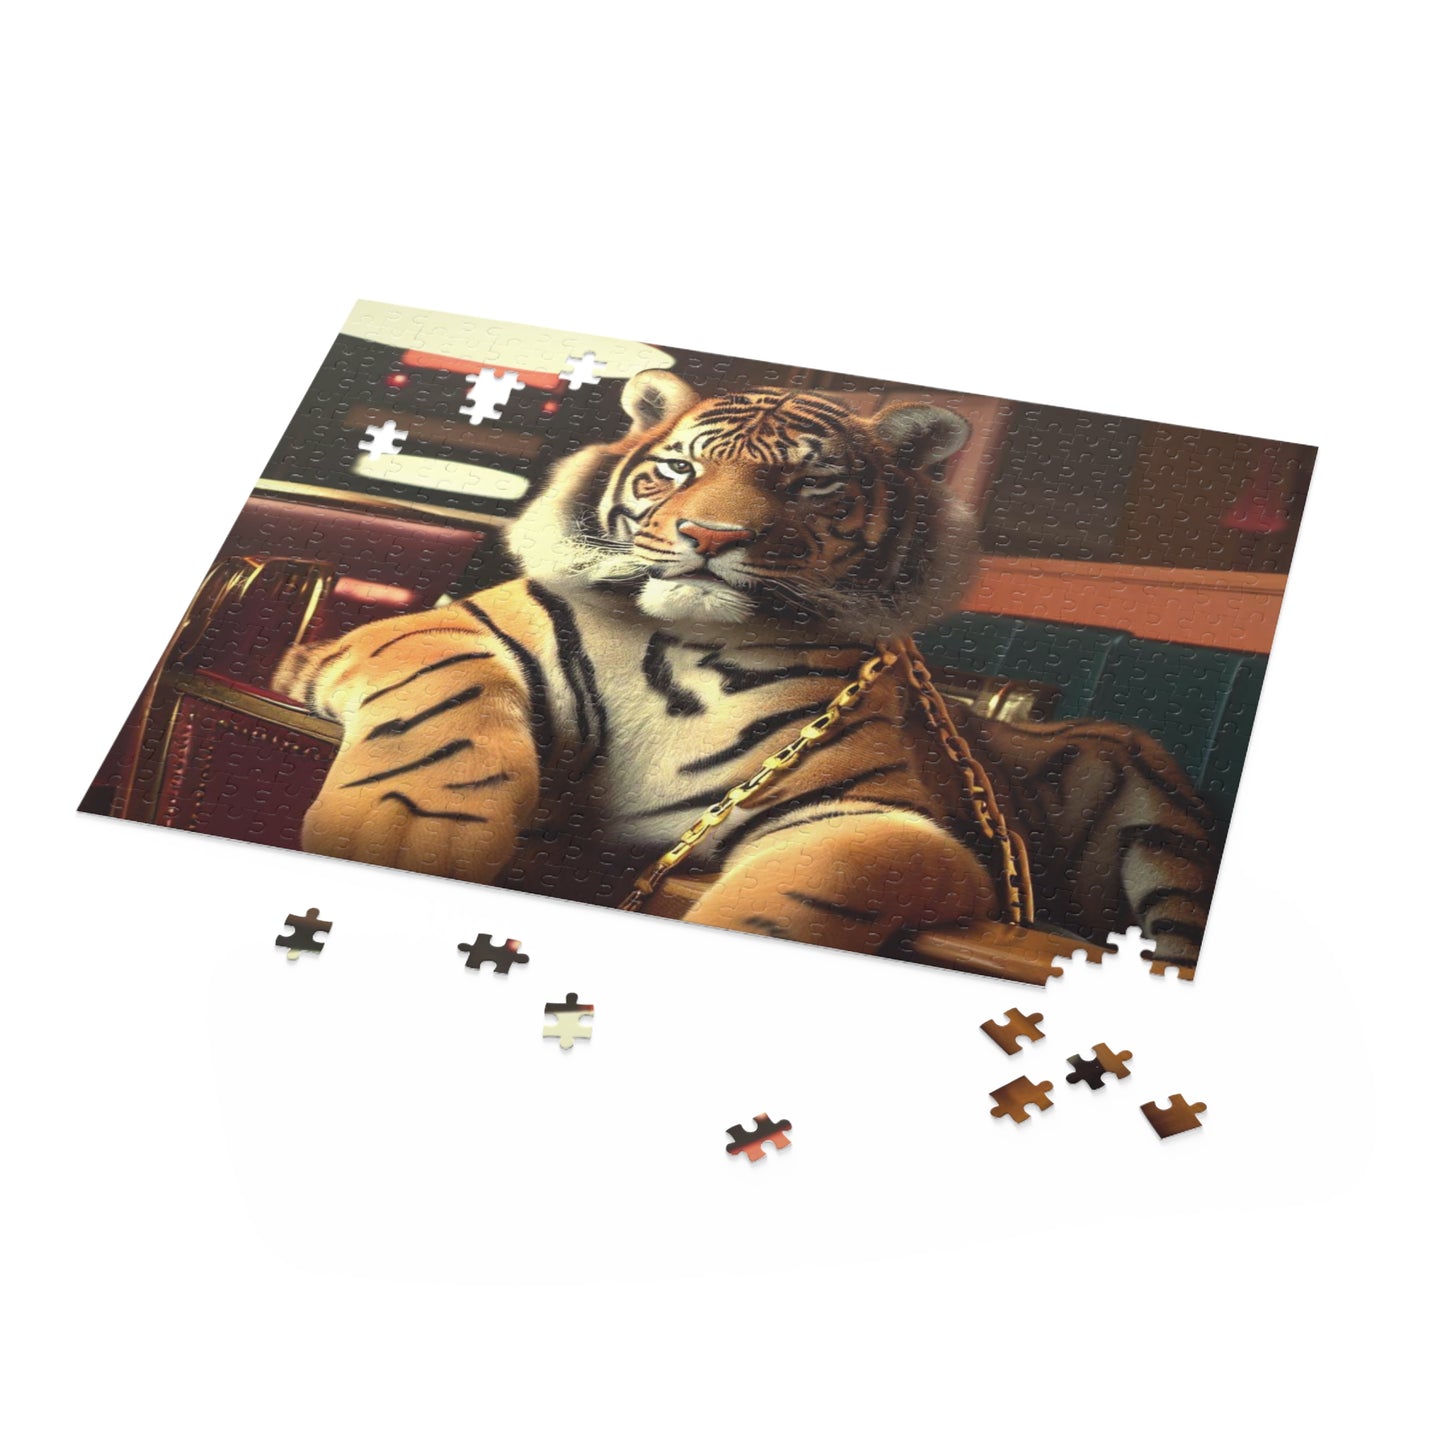 Retro Tiger In A Diner Jigsaw Puzzle 500-Piece